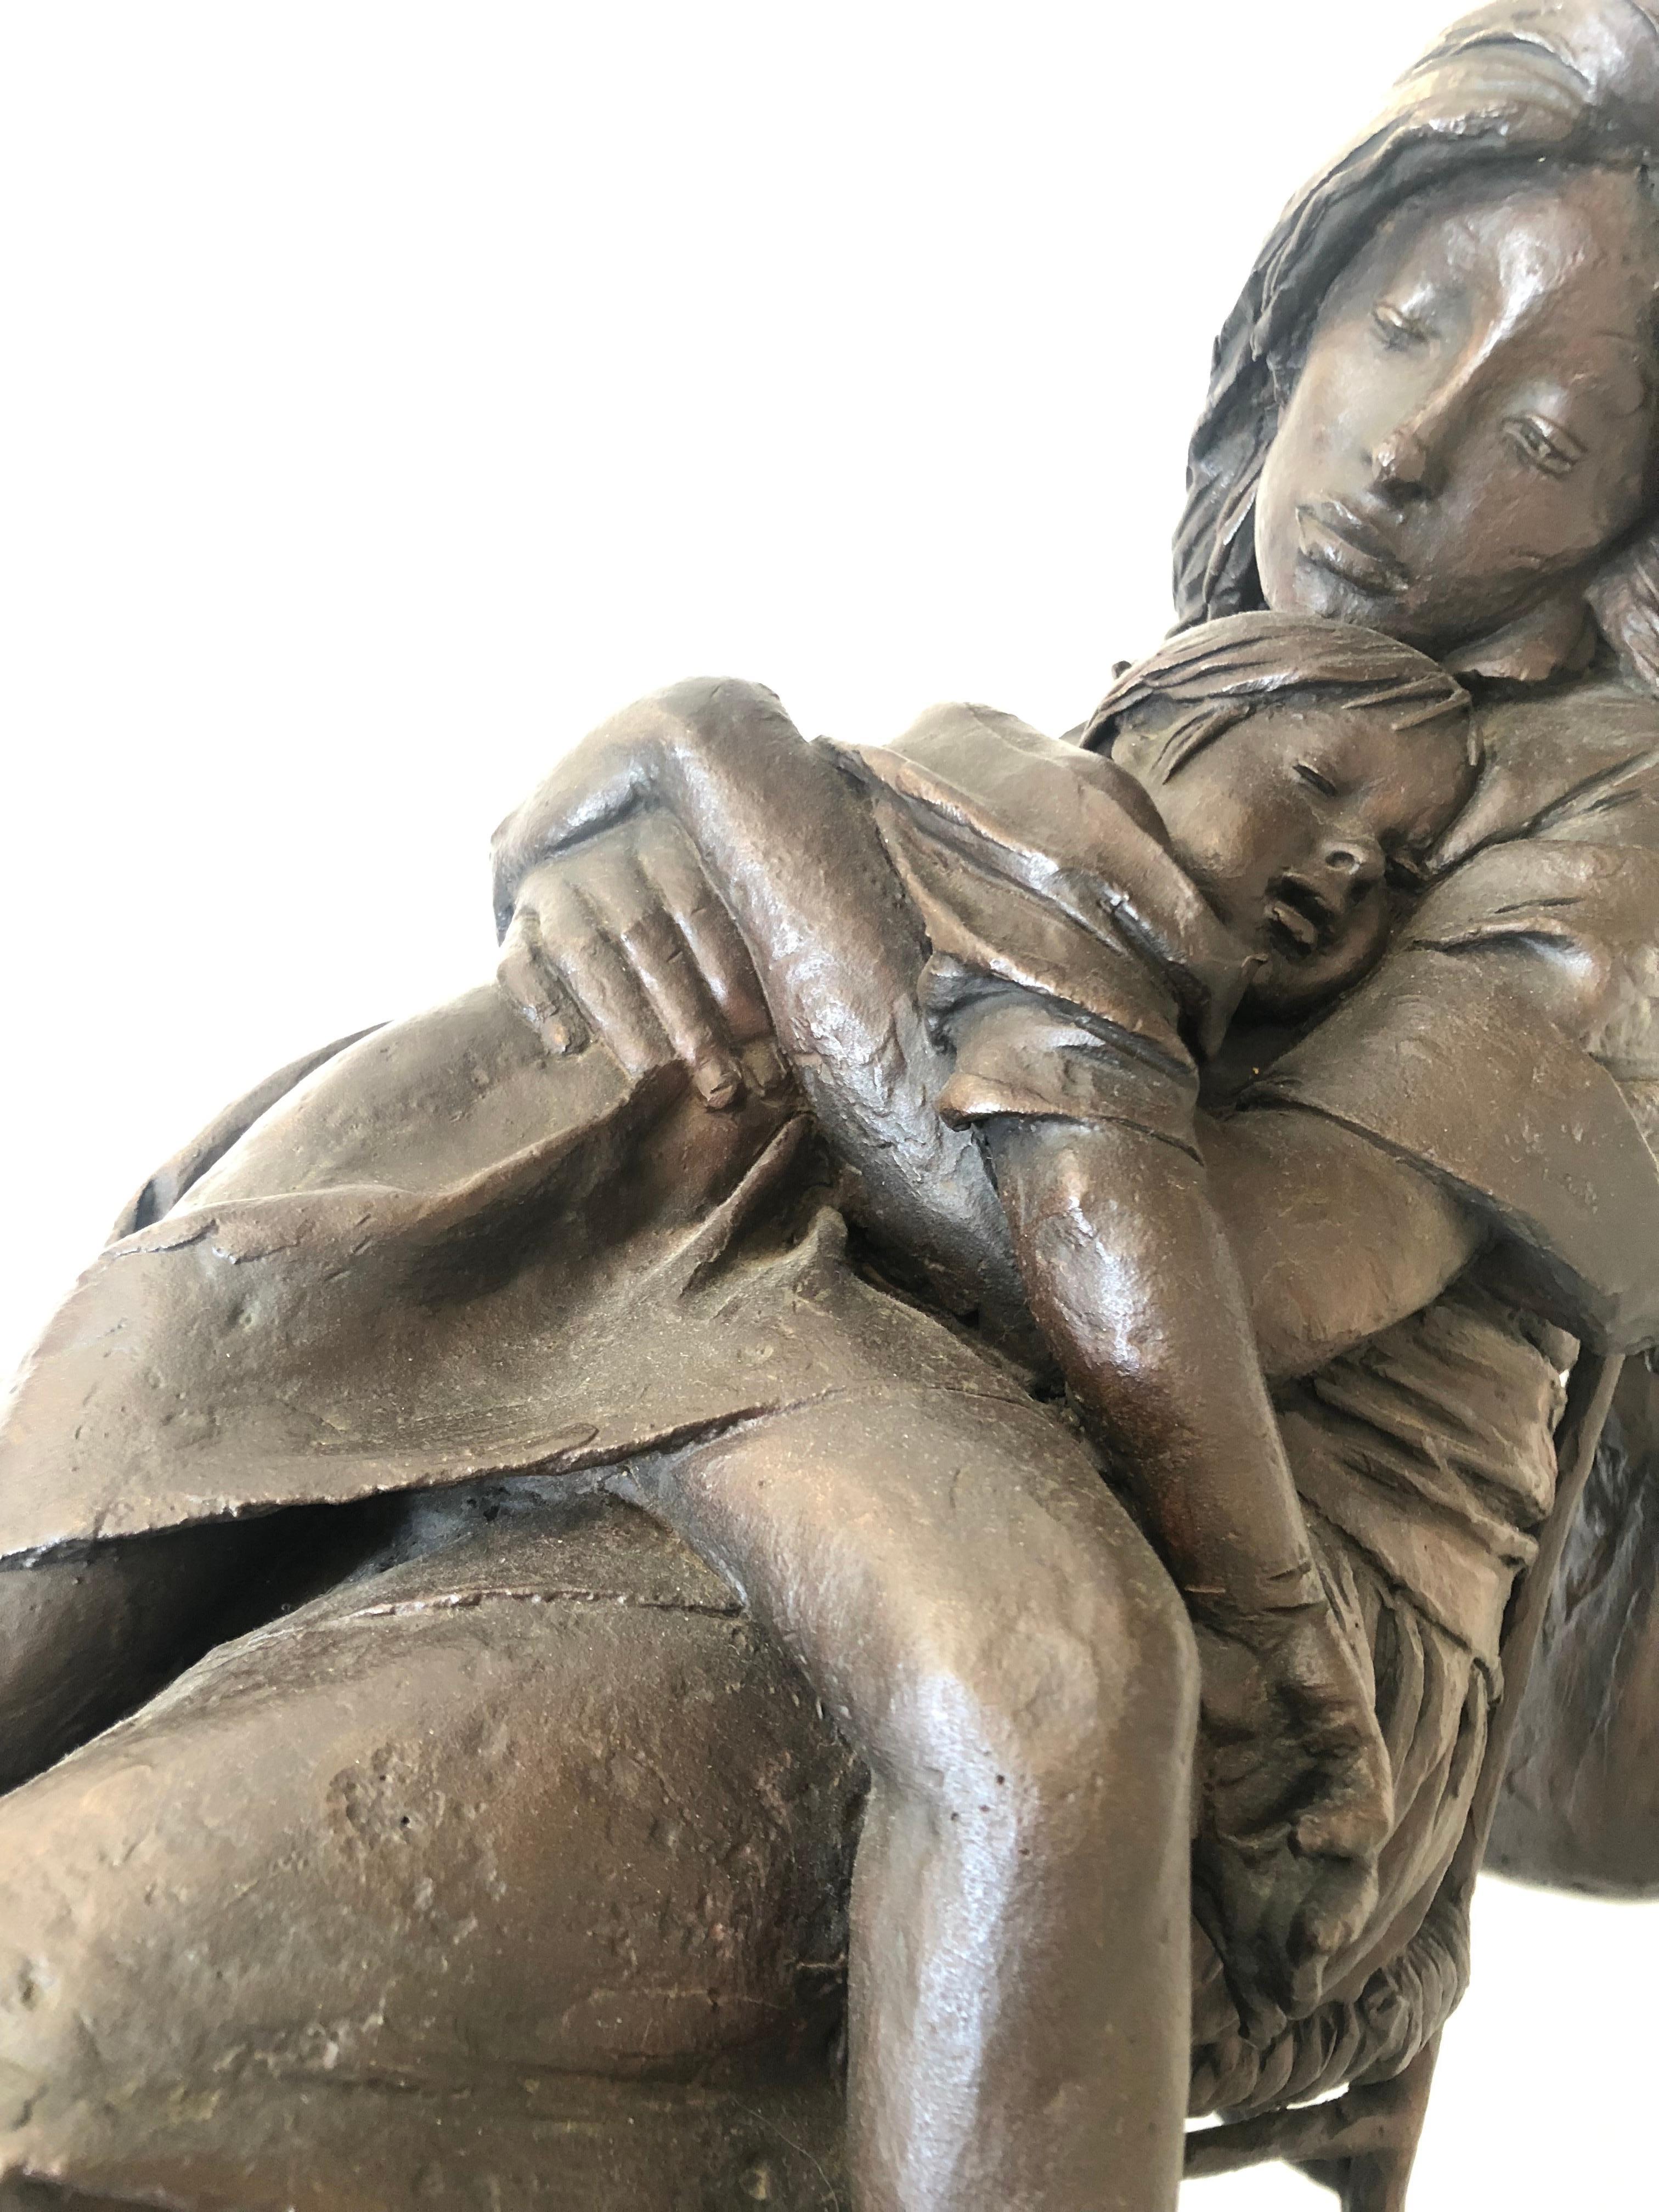 After Shopping Modern Bronze Sculpture, signed.
A wonderful bronze sculpture of a young mother resting with her child on a chair, with a handbag on the back of the chair on a limestone base.
Bruno Lucchesi was born in 1926, an Italian-American